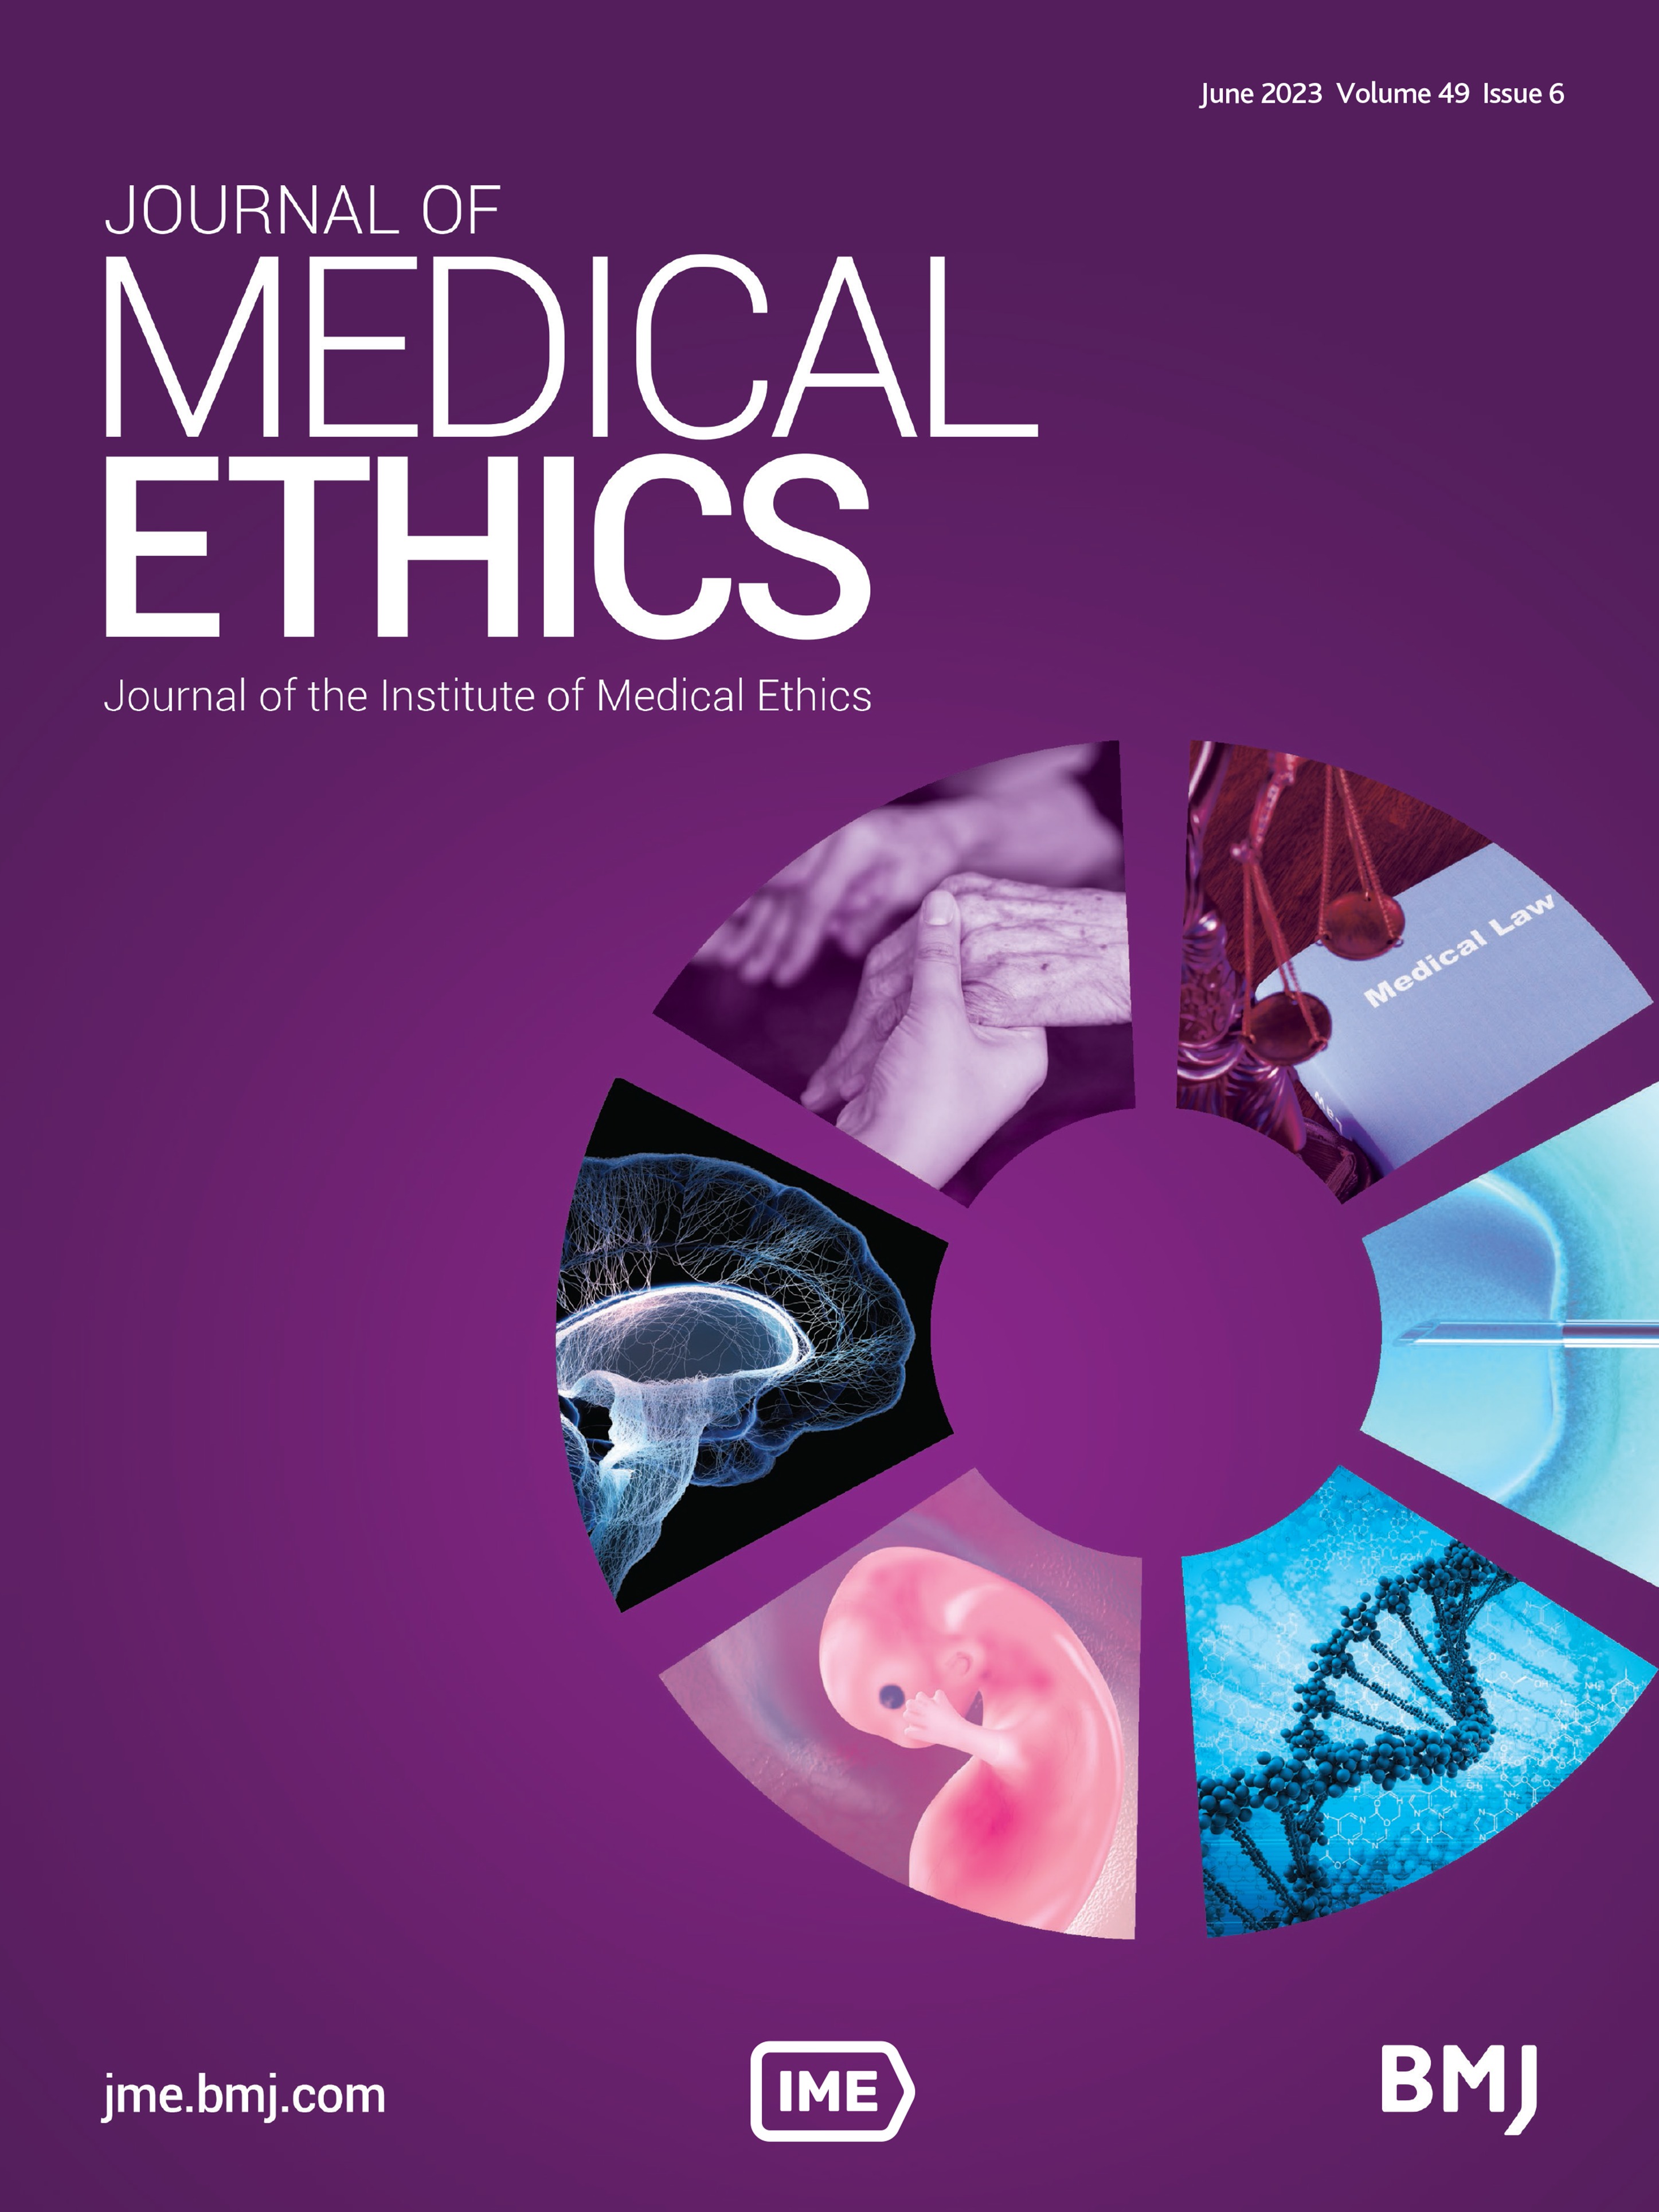 Ethical analysis examining the prioritisation of living donor transplantation in times of healthcare rationing